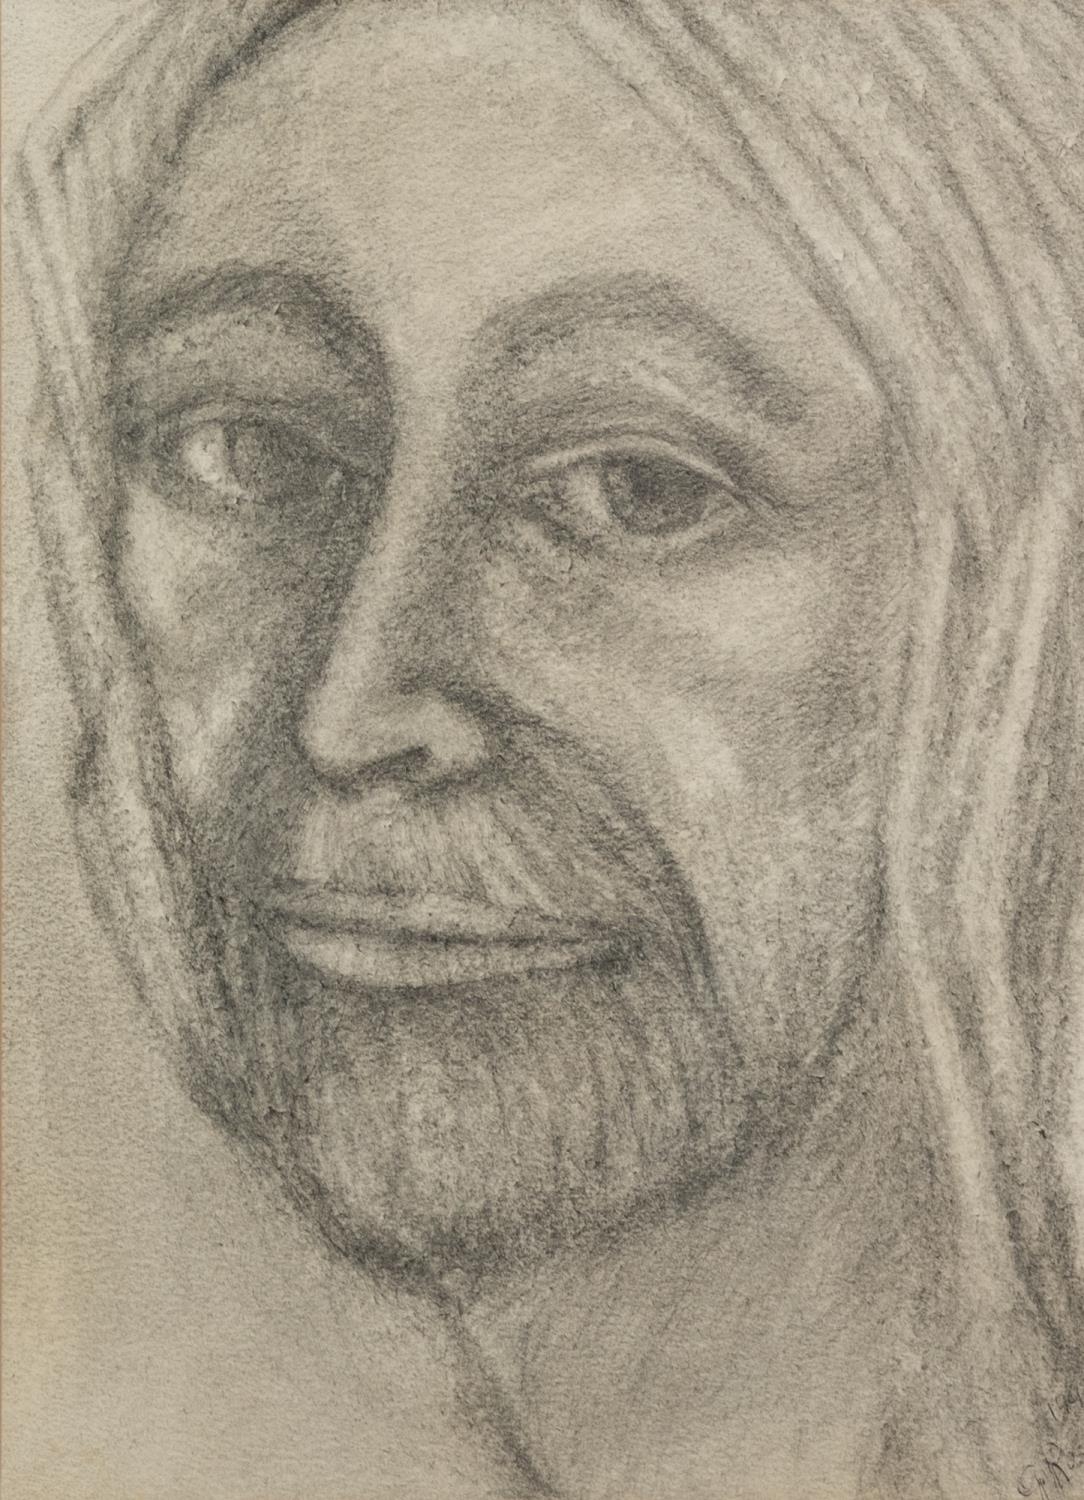 GOLDA ROSE (1921-2016) PENCIL DRAWING Face of a bearded man Signed and dated 1992 13 ¼? x 9 ¾? (33.